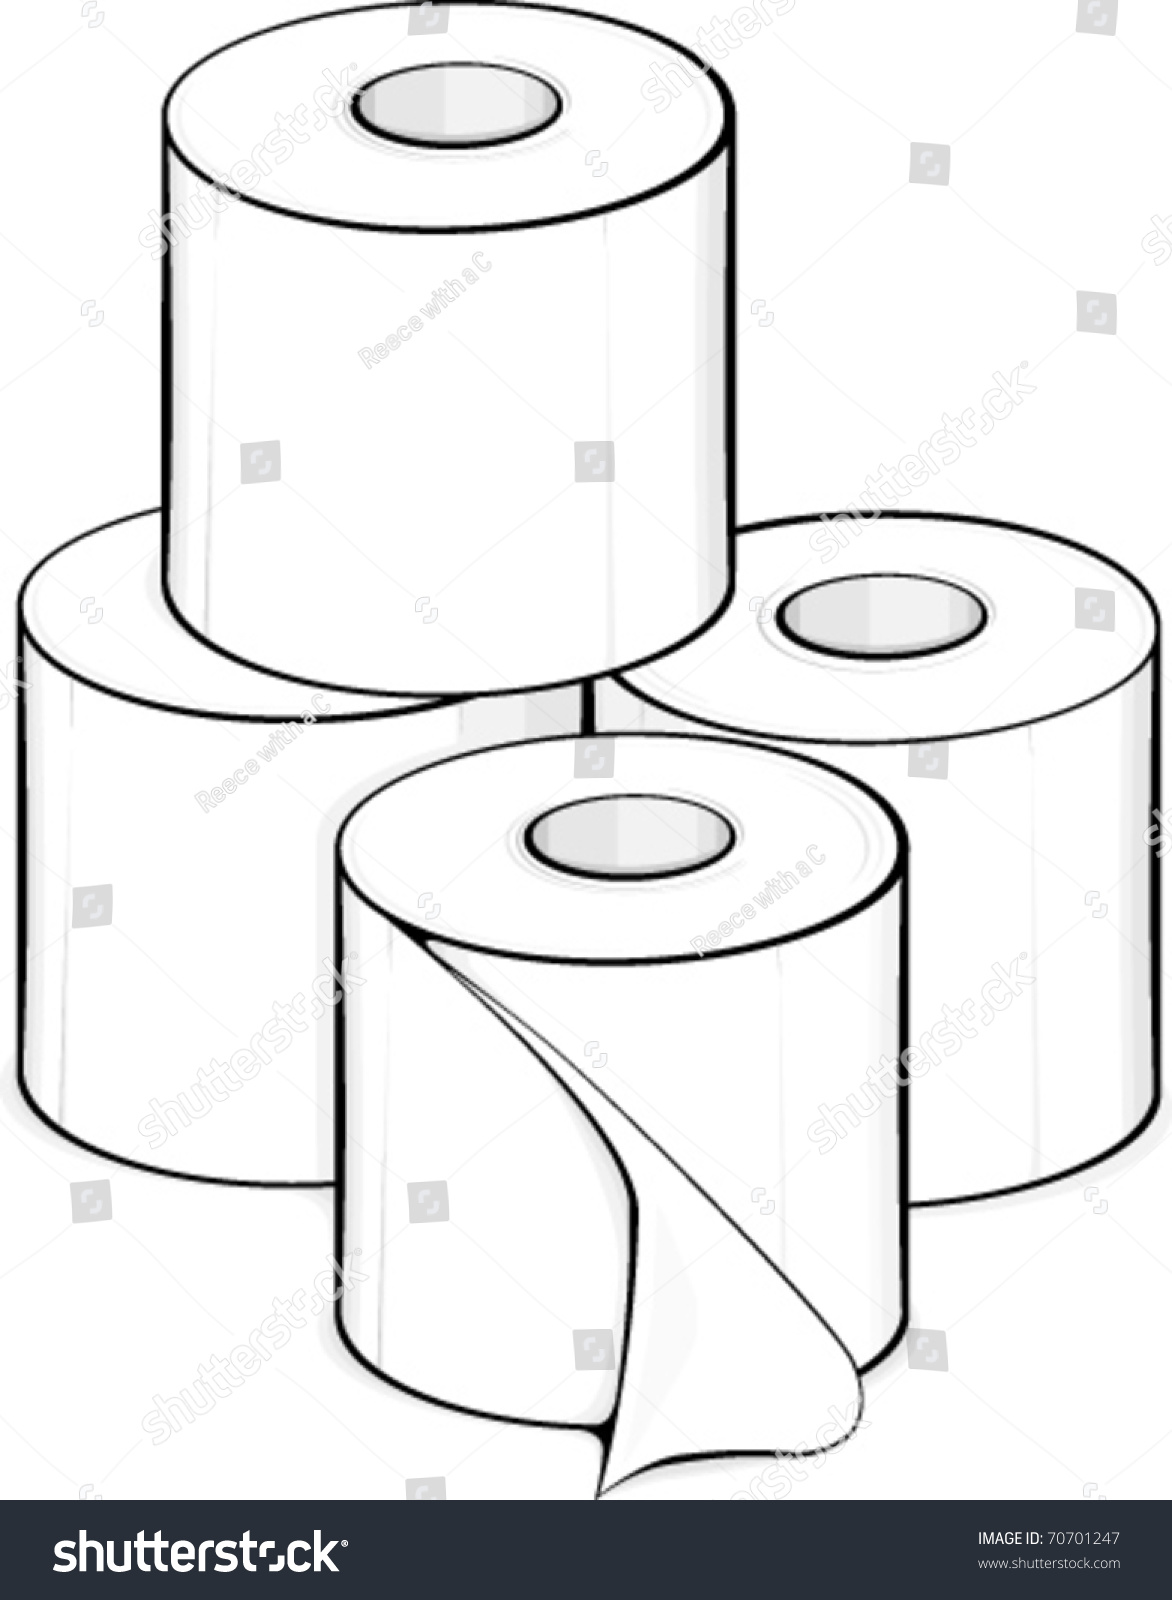 clipart toilet paper roll - photo #33